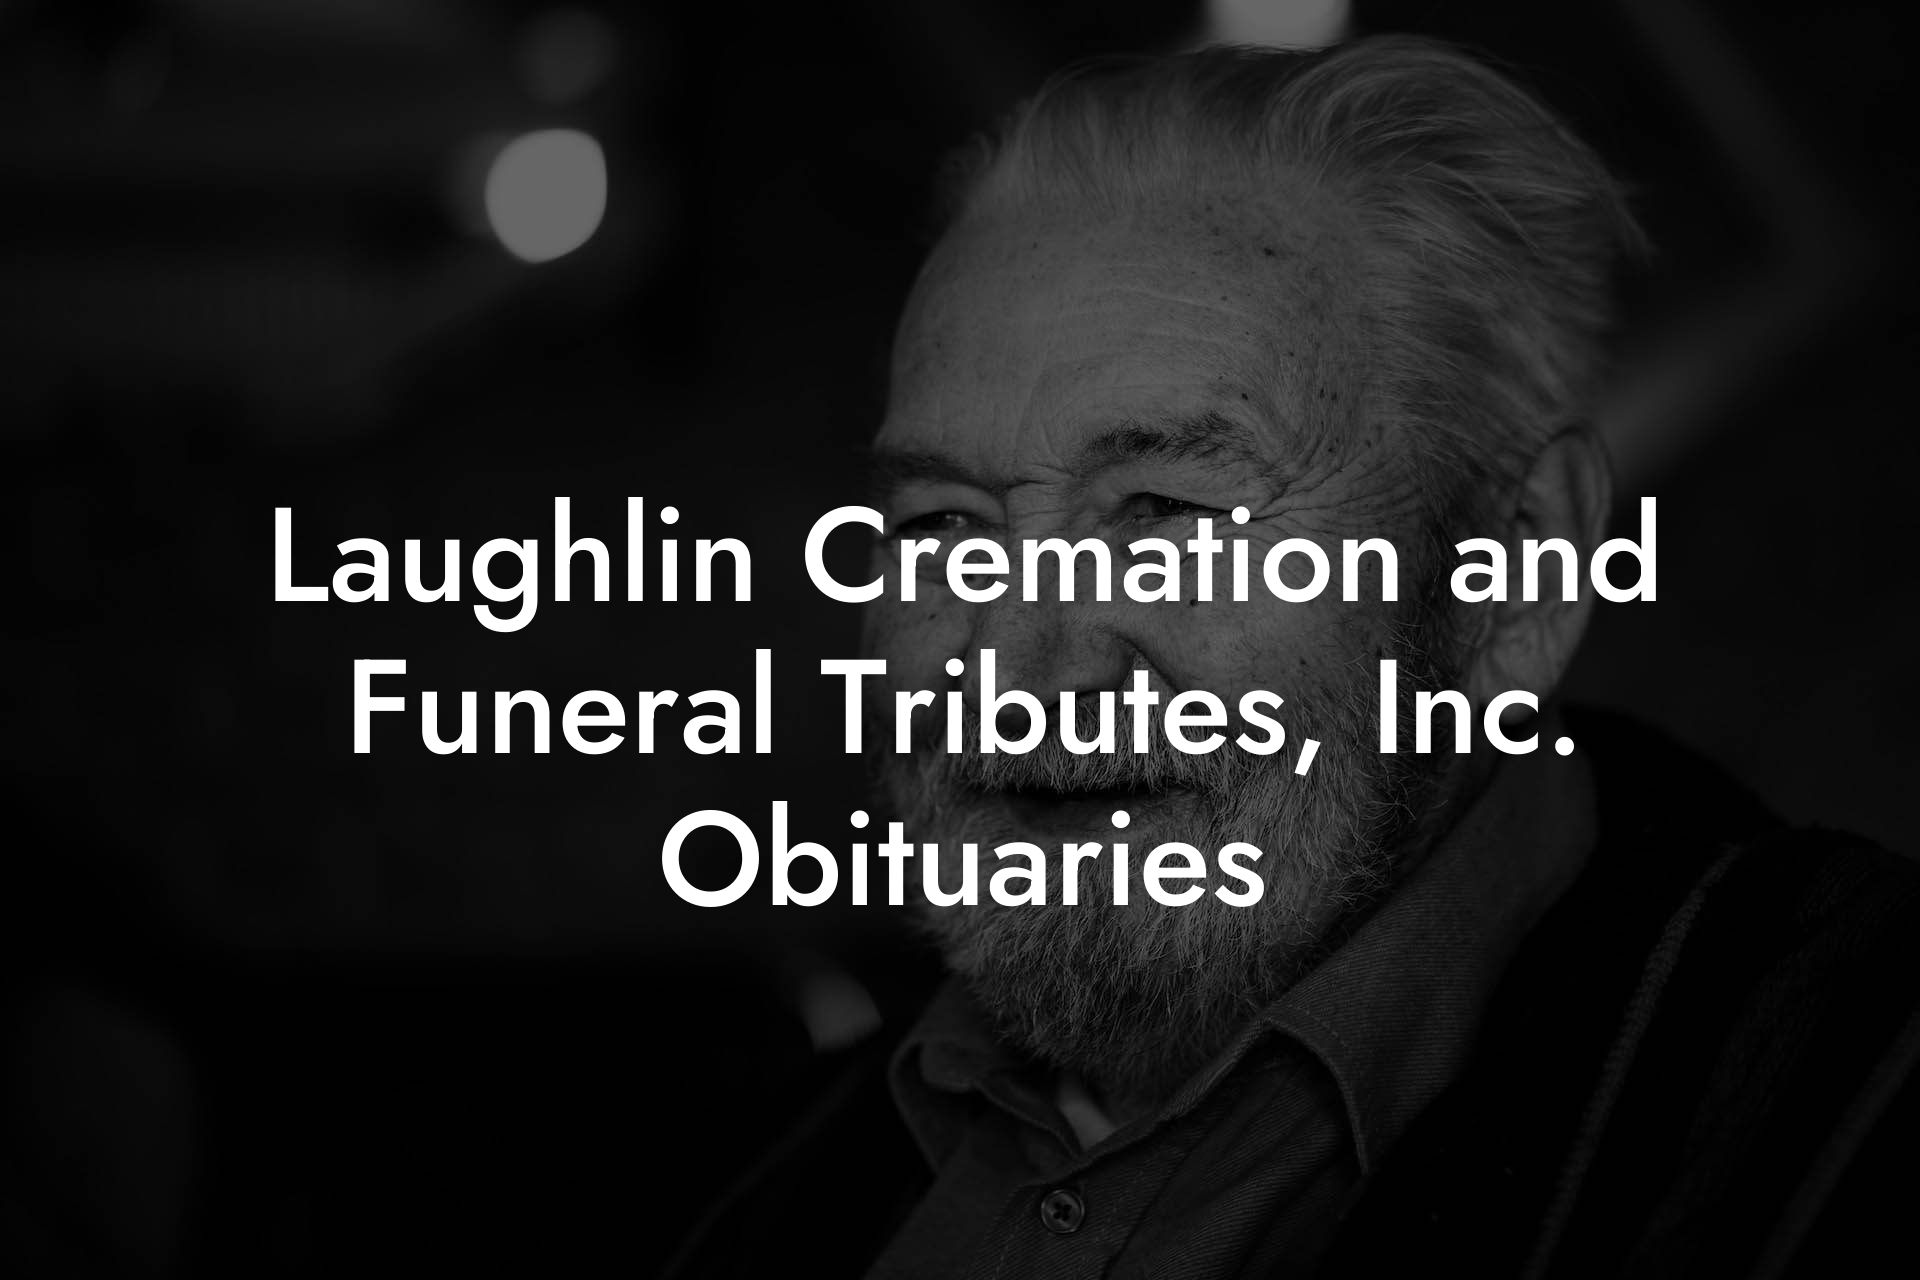 Laughlin Cremation and Funeral Tributes, Inc. Obituaries